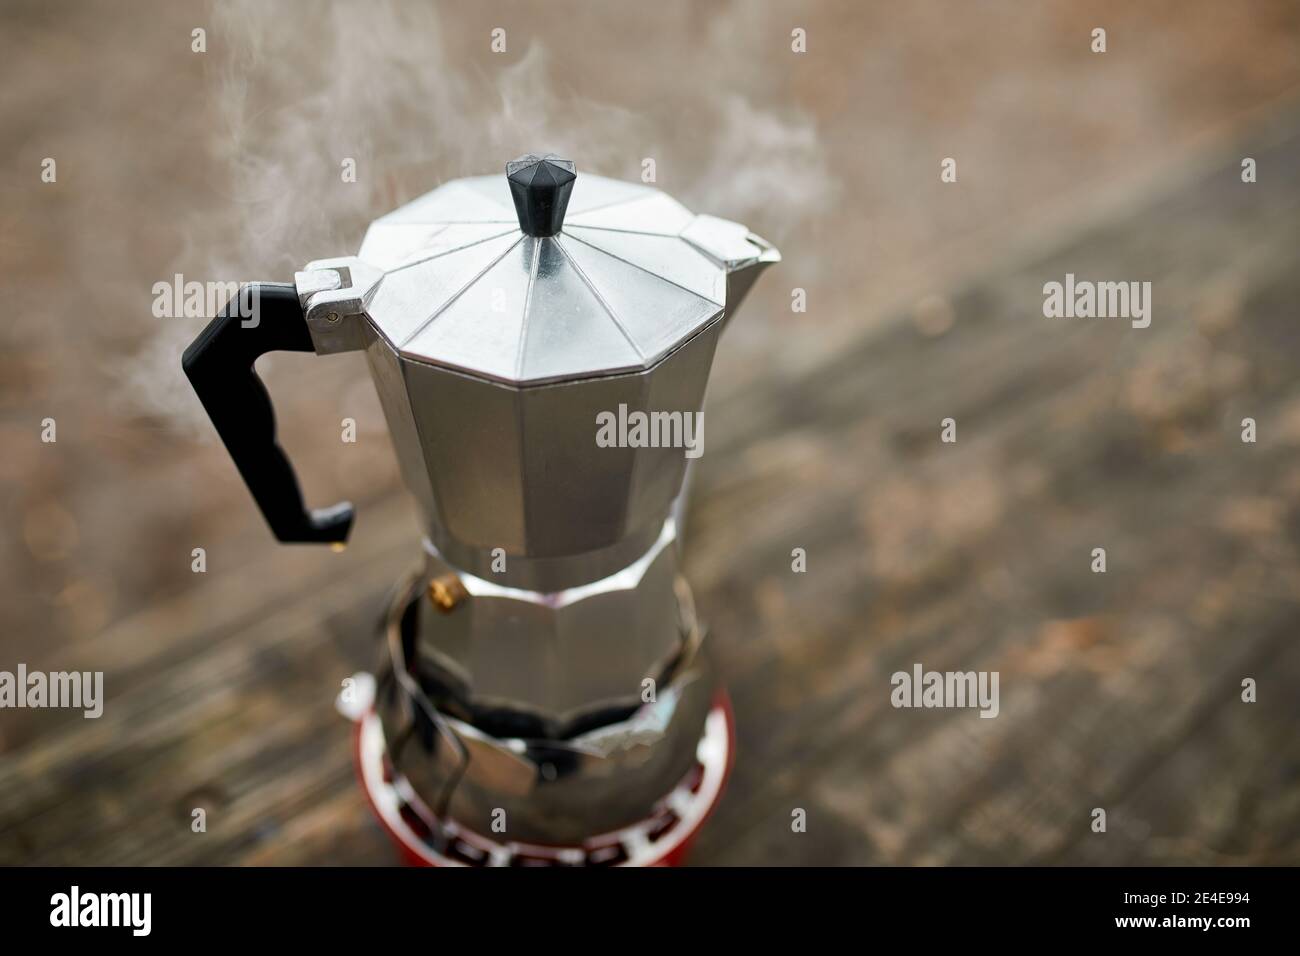 https://c8.alamy.com/comp/2E4E994/process-of-making-camping-coffee-outdoor-with-metal-geyser-coffee-maker-on-a-gas-burner-step-by-step-travel-activity-for-relaxing-bushcraft-advent-2E4E994.jpg